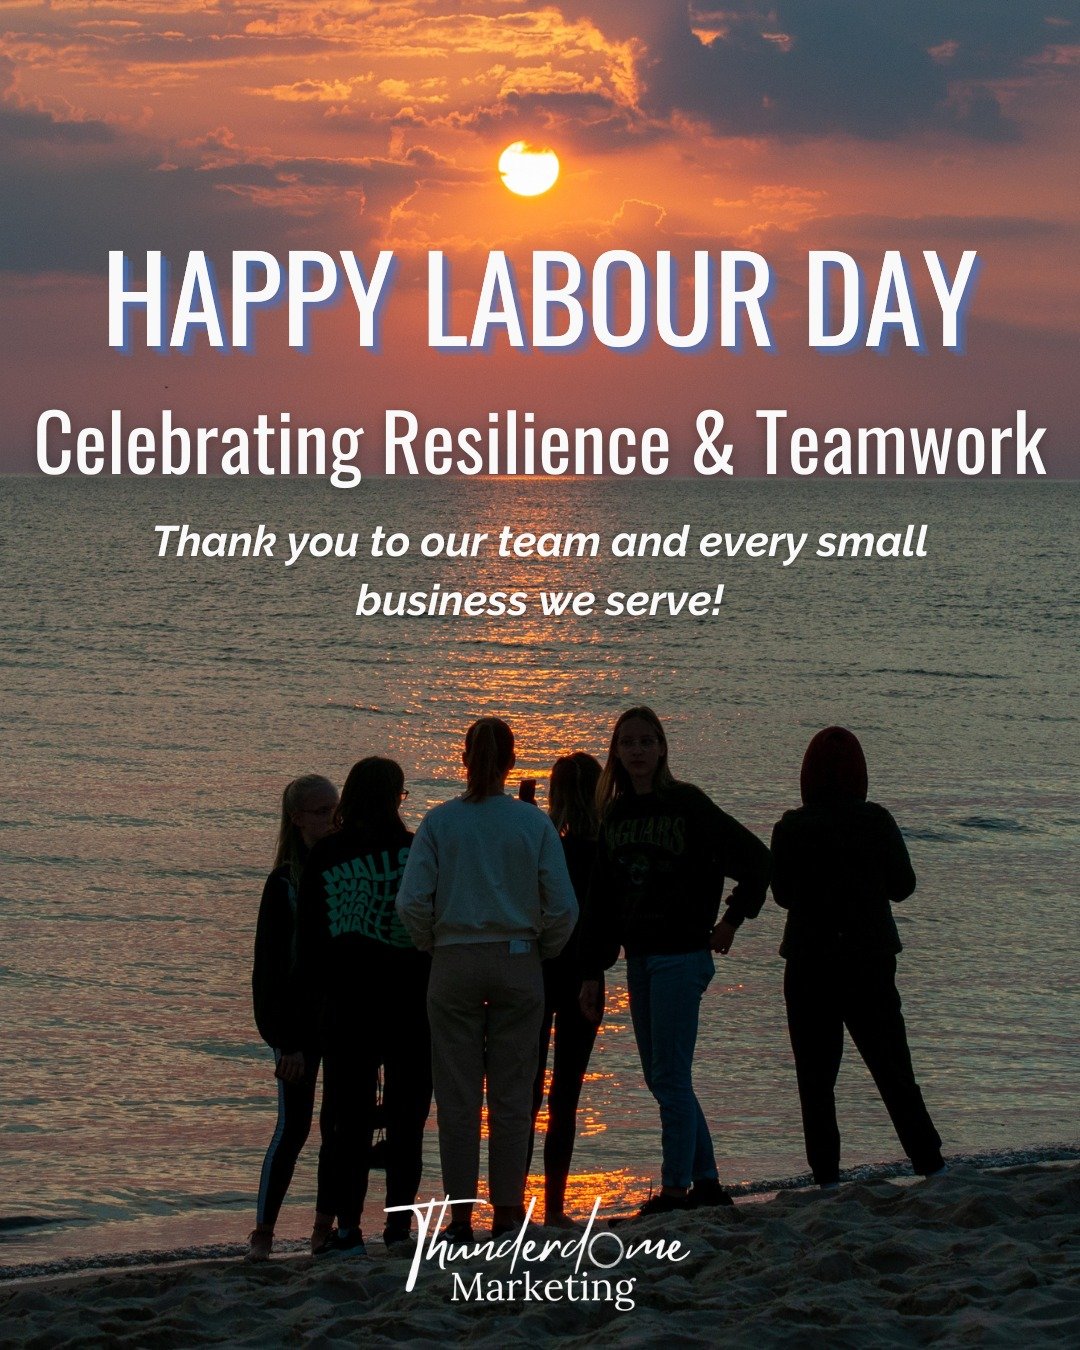 🎉 Today, we celebrate Labour Day by honoring the spirit of hard work and collaboration that drives us forward. A big thank you to our dedicated team and the passionate small business owners we work with every day. Your resilience and commitment insp